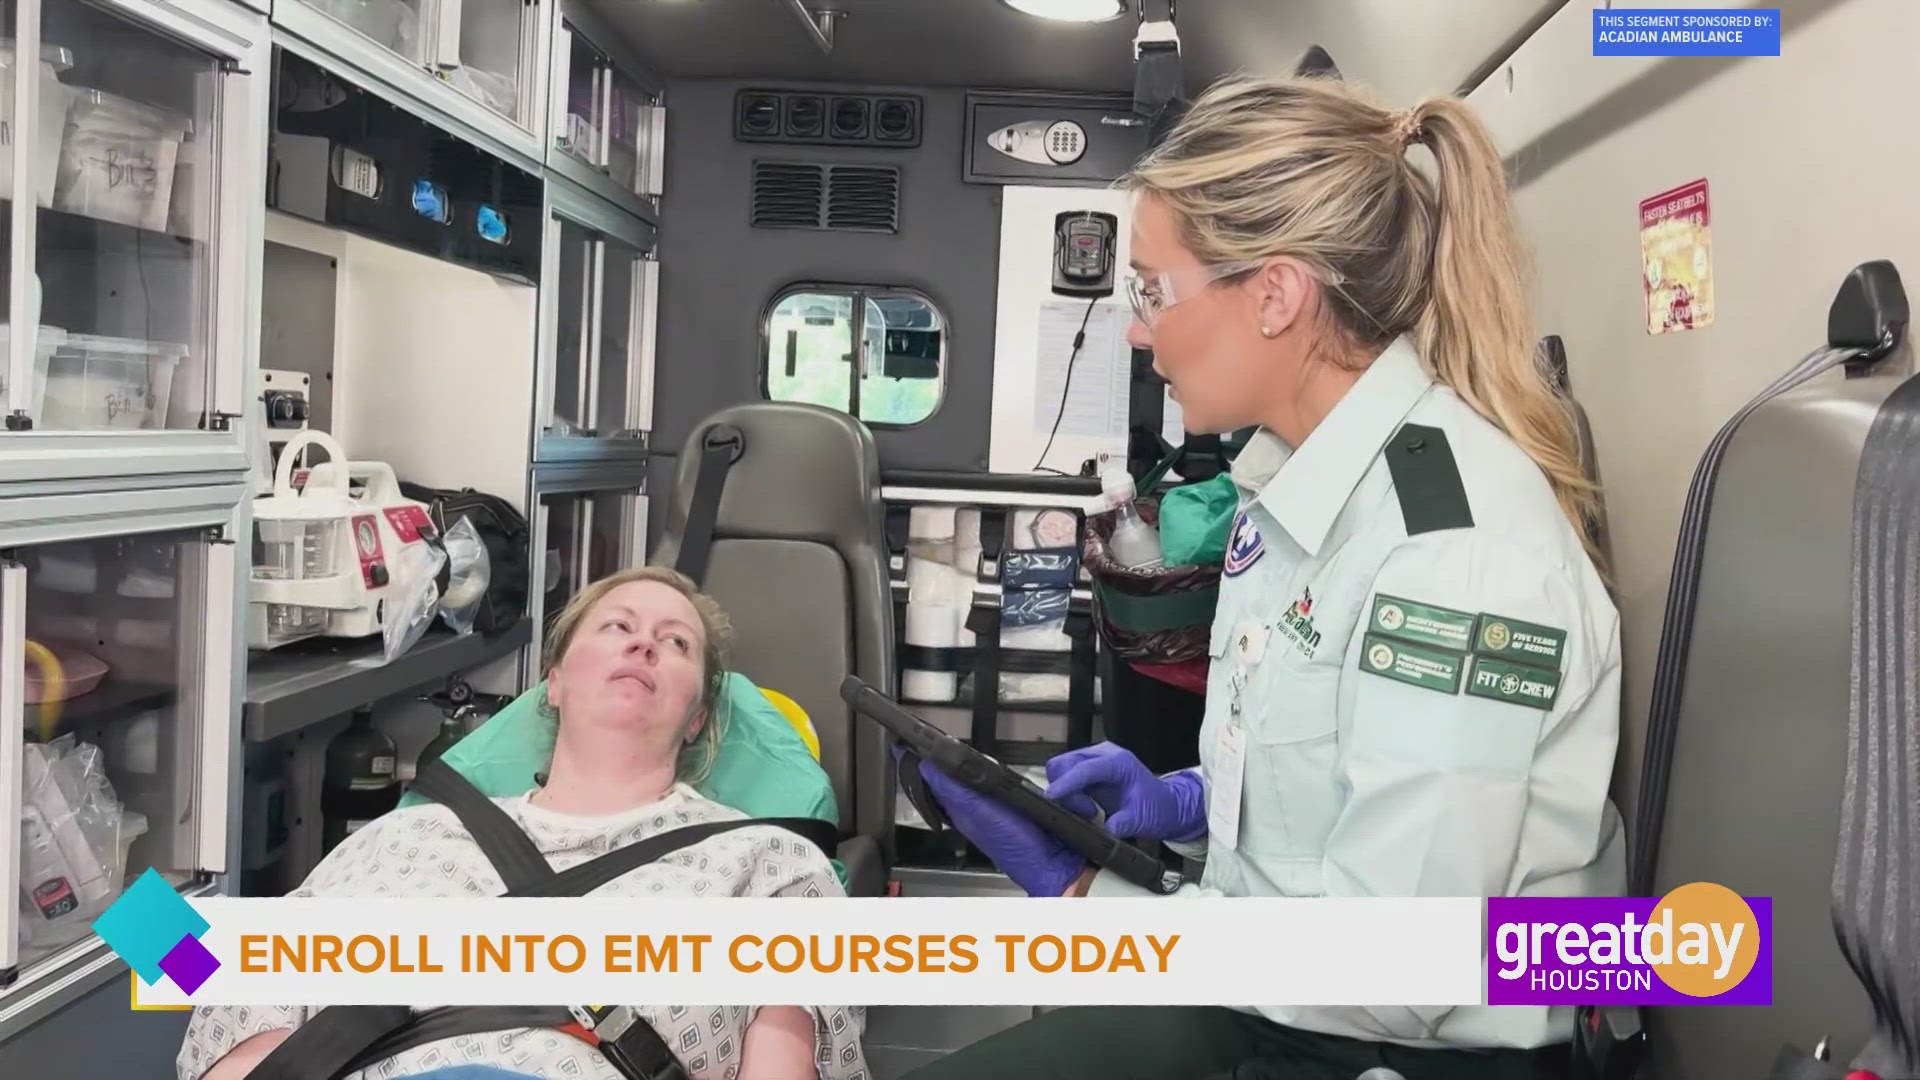 Kristine Koerner and Langston Hayes with National EMS Academy share how you can join the life-changing career of EMS Services.